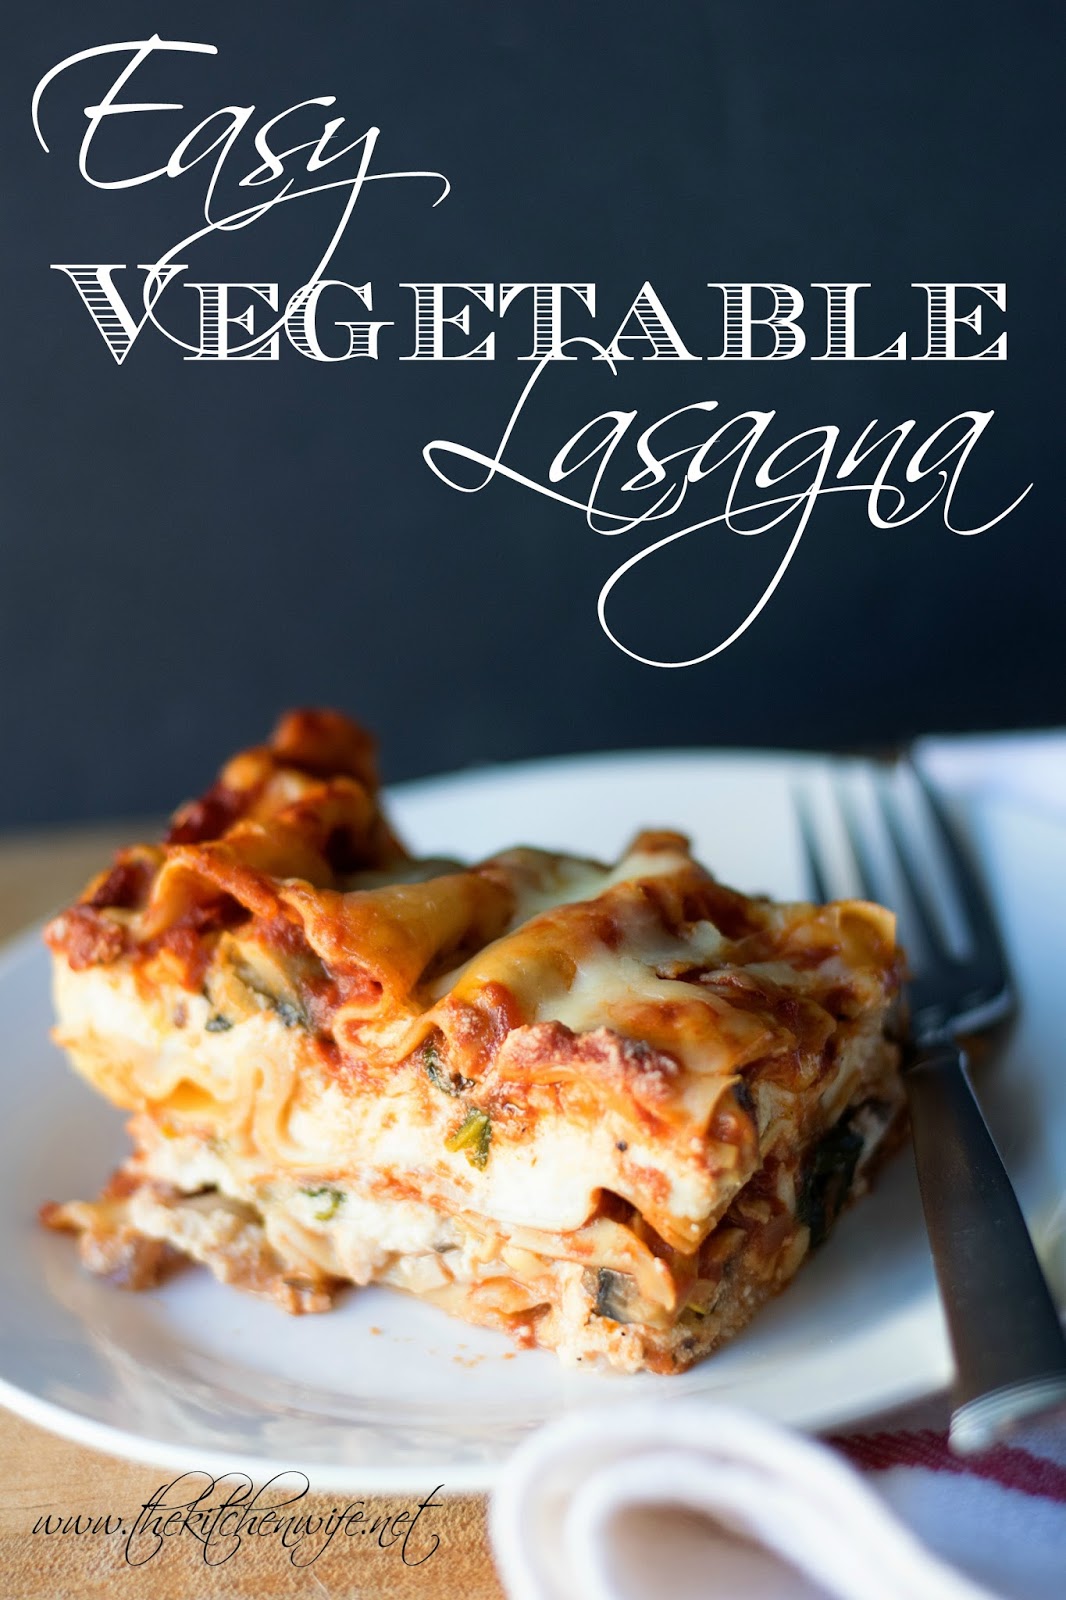 Easy Vegetable Lasagna Recipe - The Kitchen Wife